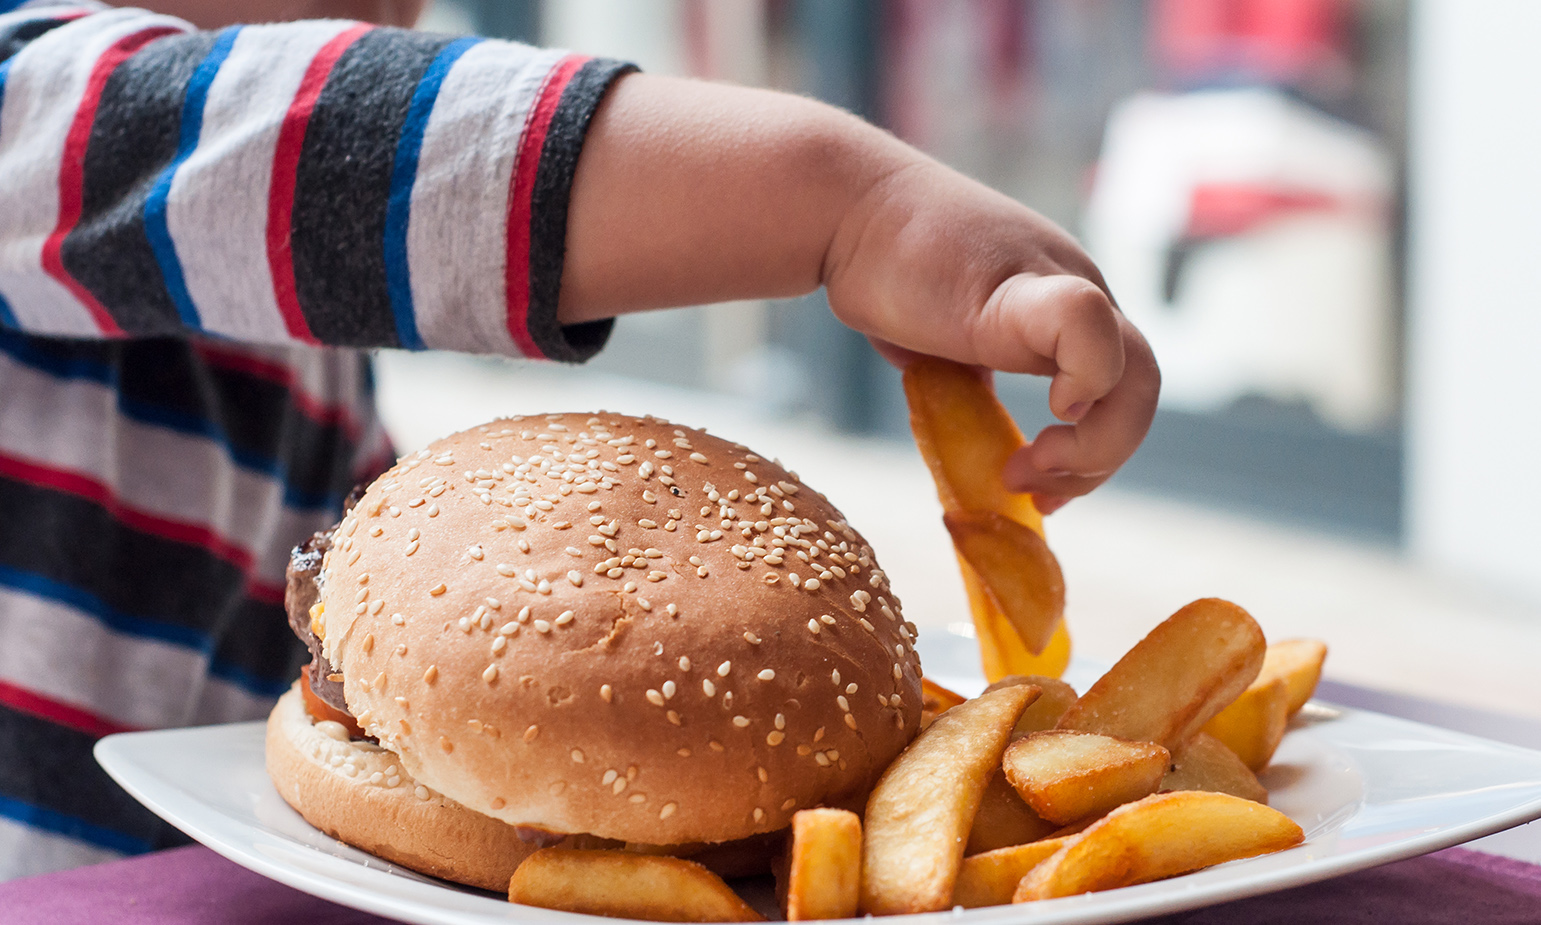 Child grabbing from a stack of large french fry wedges on plate with adult-sized hamburger